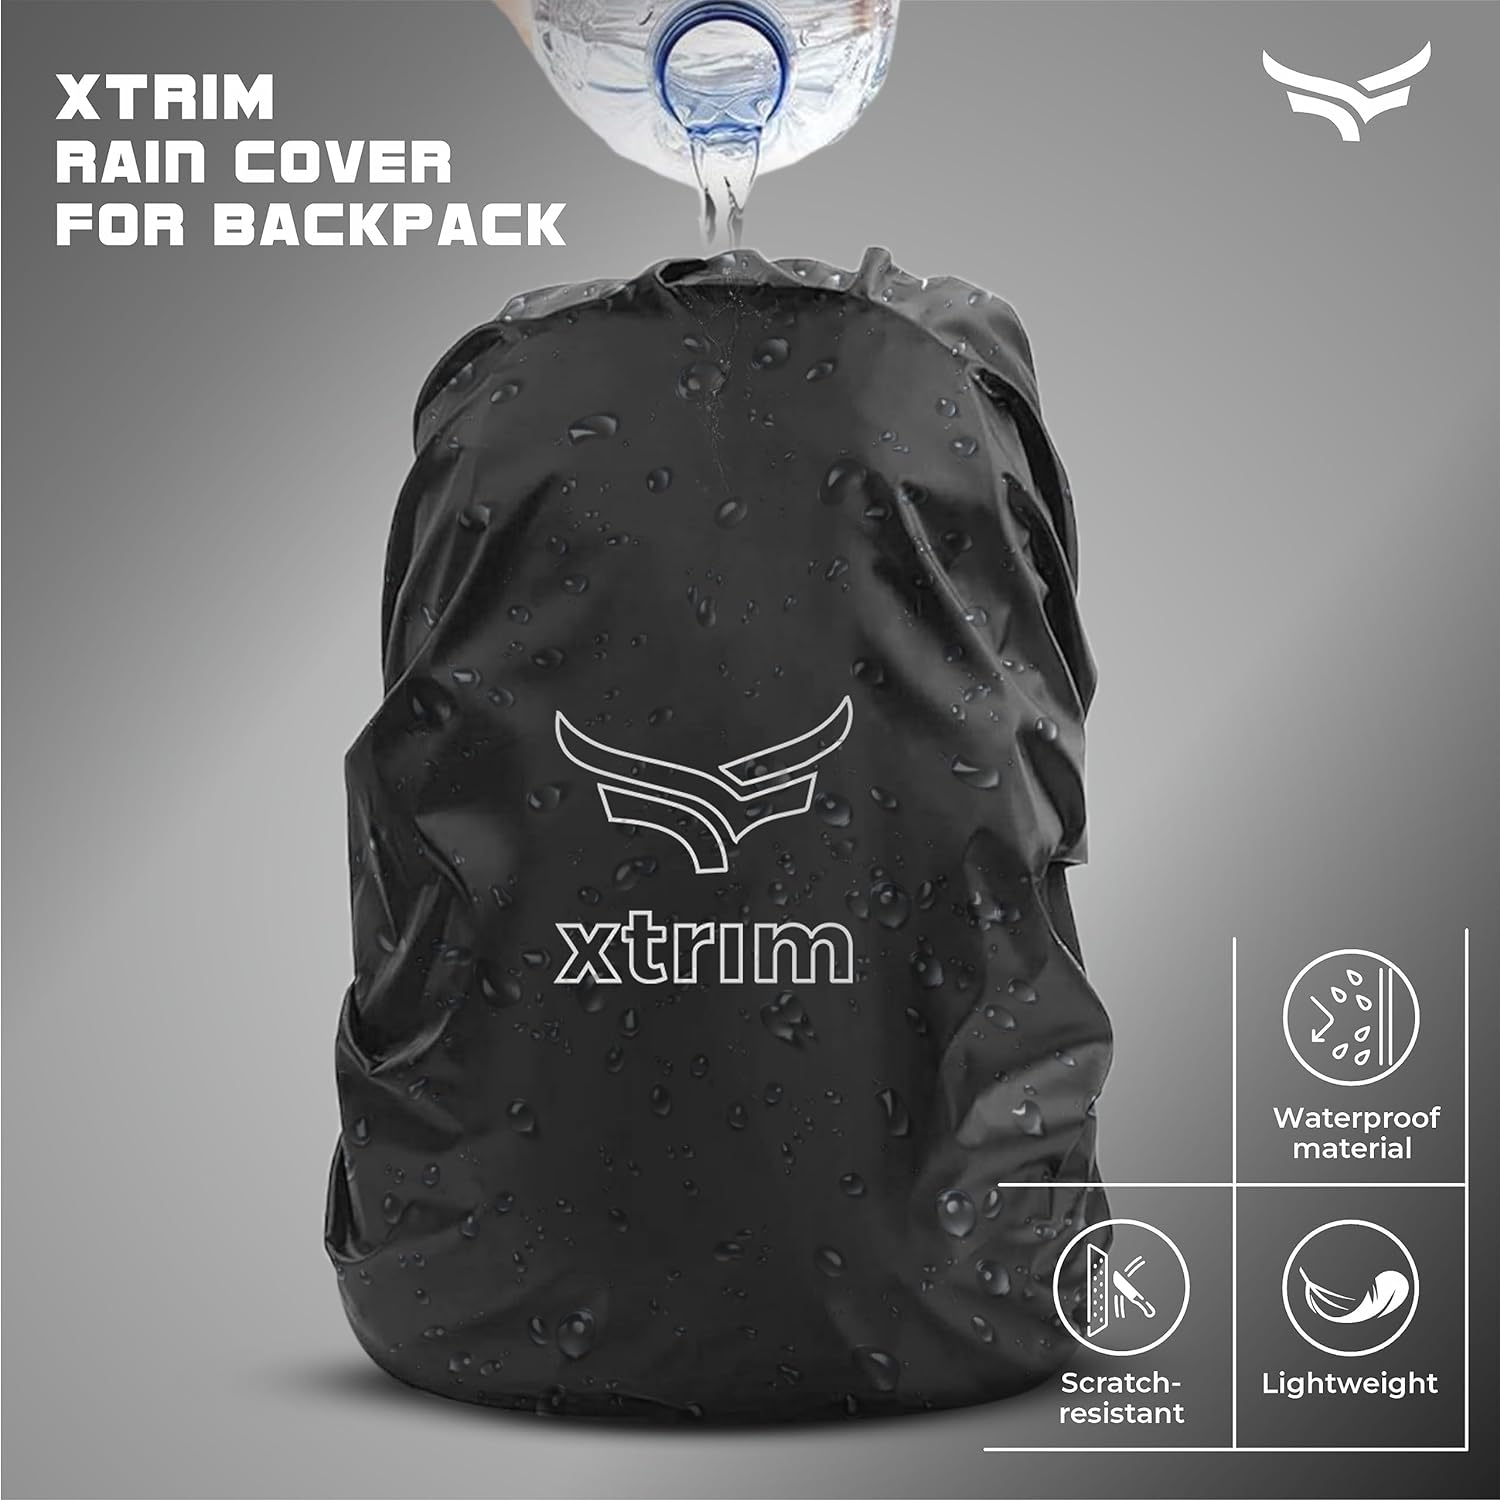 100% Rain &amp; Dust Proof Protector for 30L to 40L Backpacks, Rain Cover for Bags with Storage Pouch, Rain Cover for School Bags, Rain Cover, Specially for Trekking &amp; Camping (Black)